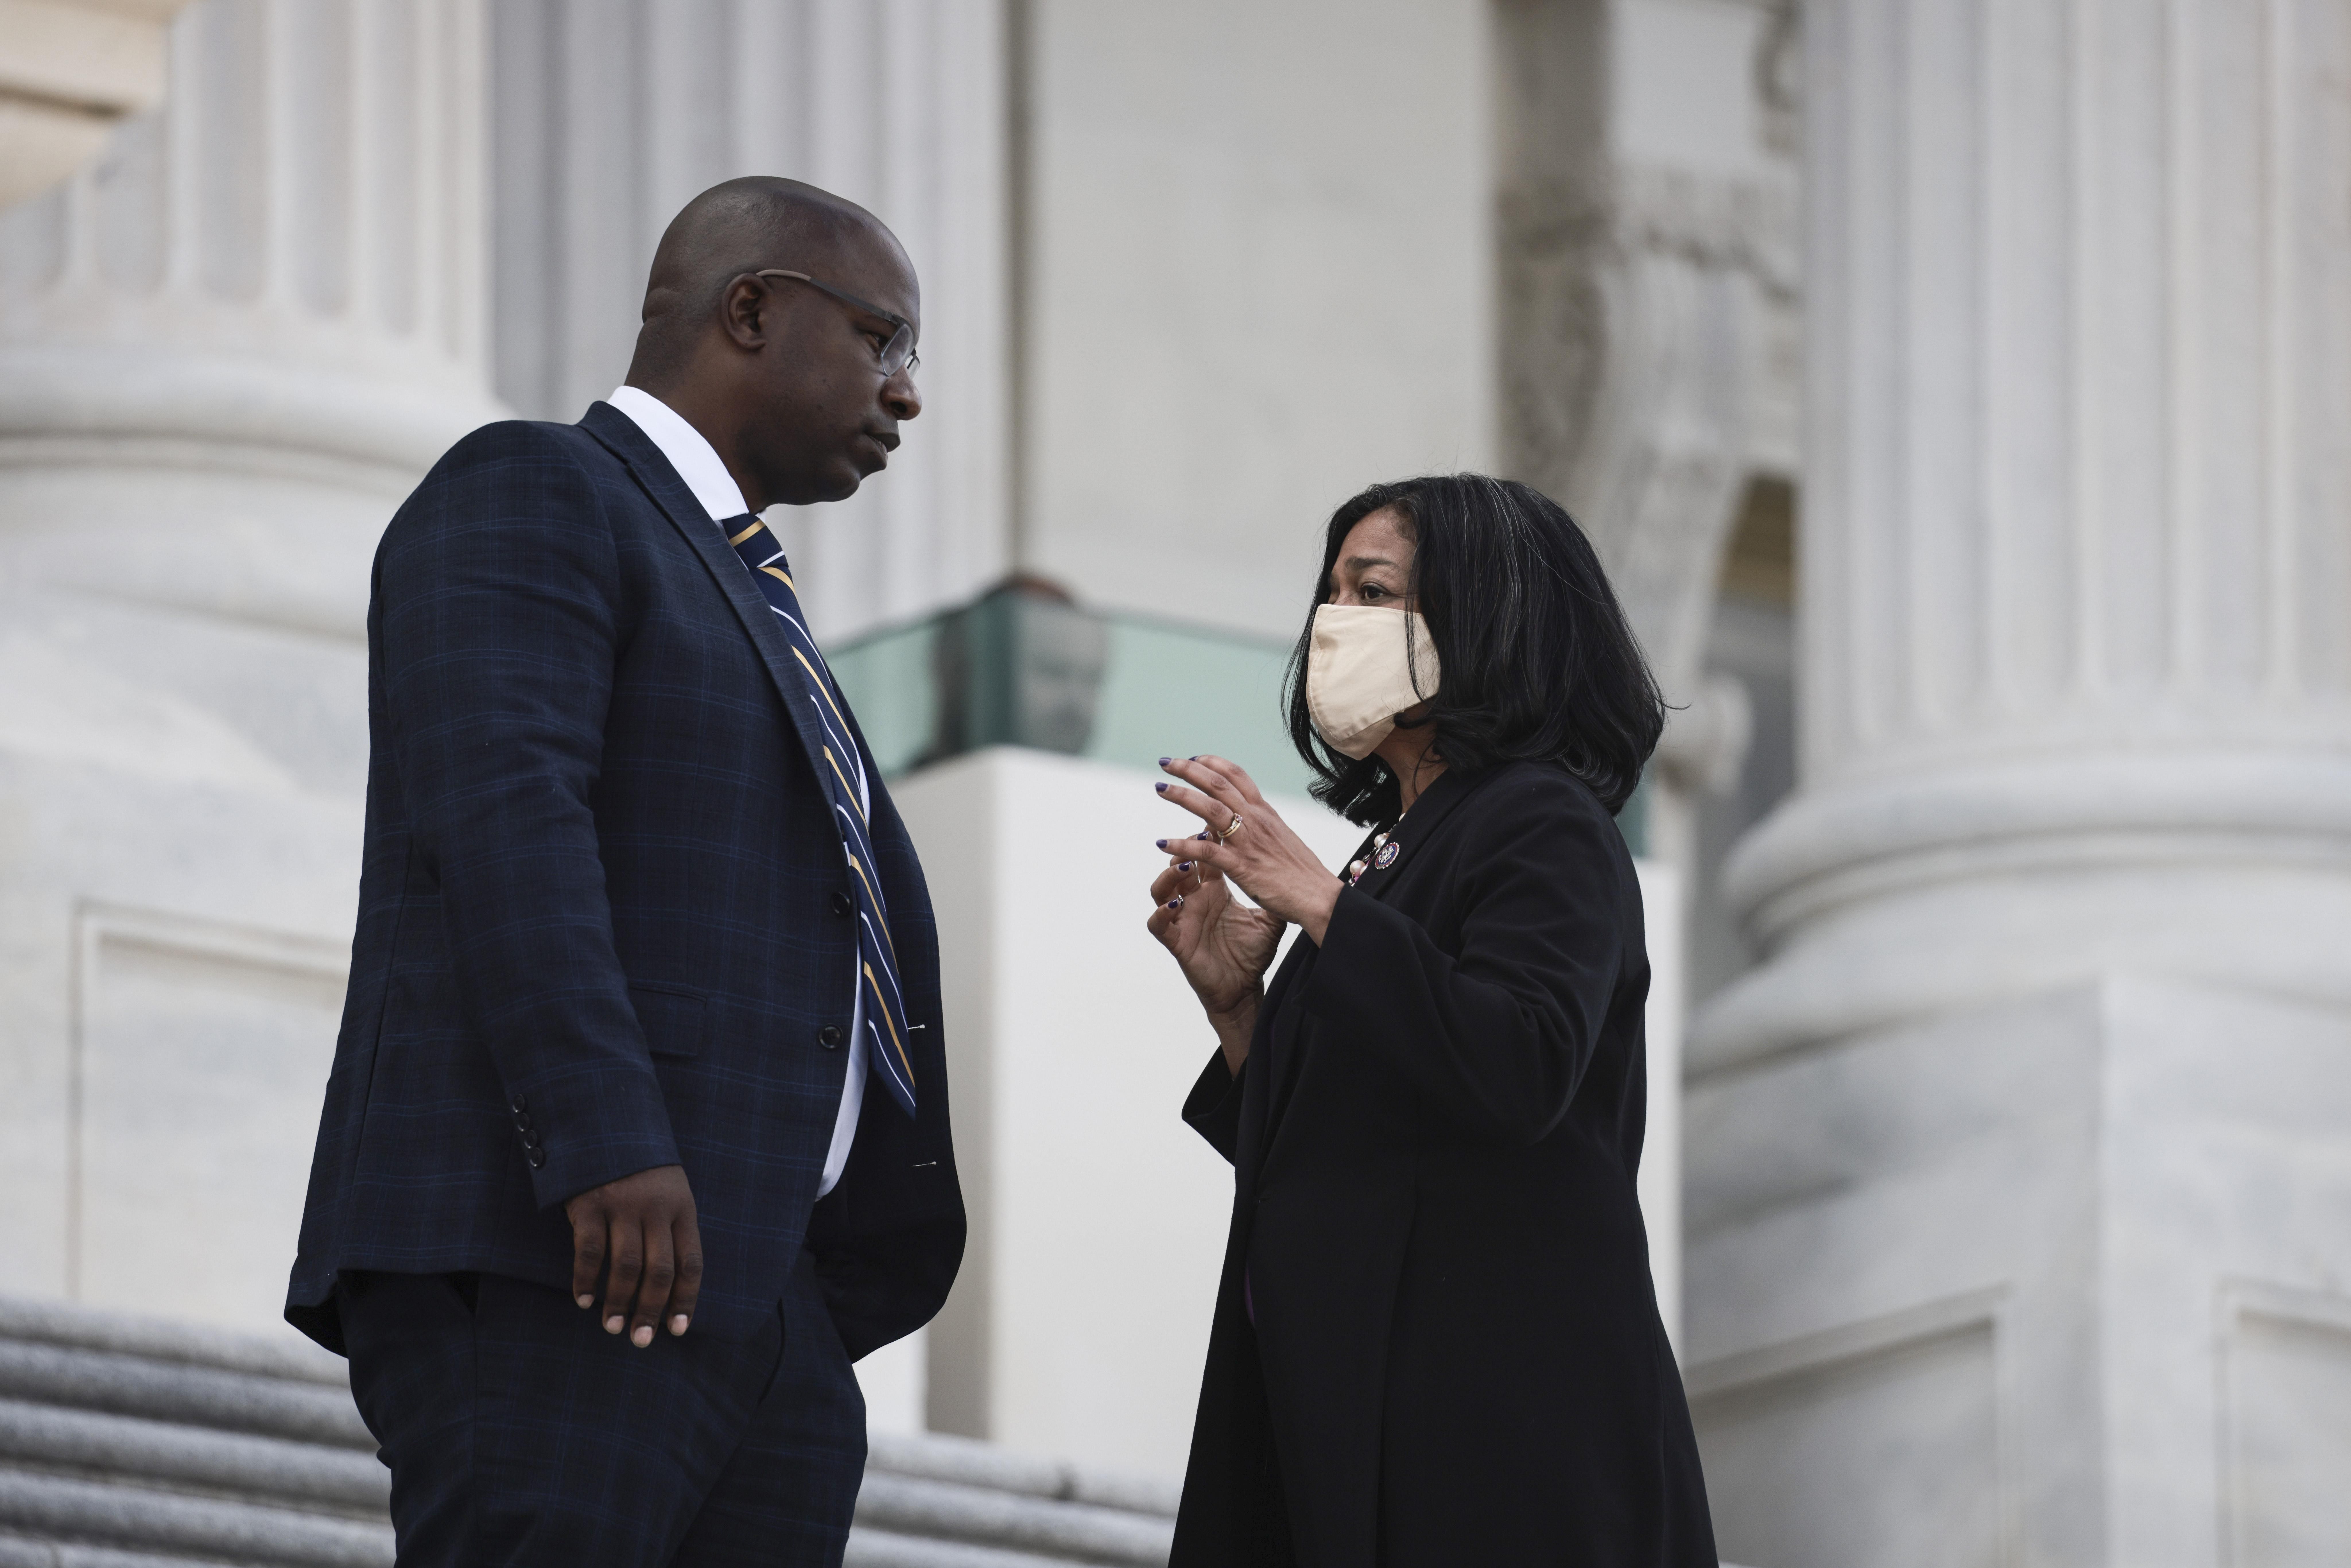 Democratic Reps. Jamaal Bowman (N.Y.) and Pramila Jayapal (Wash.) speak to one another on the steps to the U.S. Capitol on September 23, 2021 in Washington, D.C. 